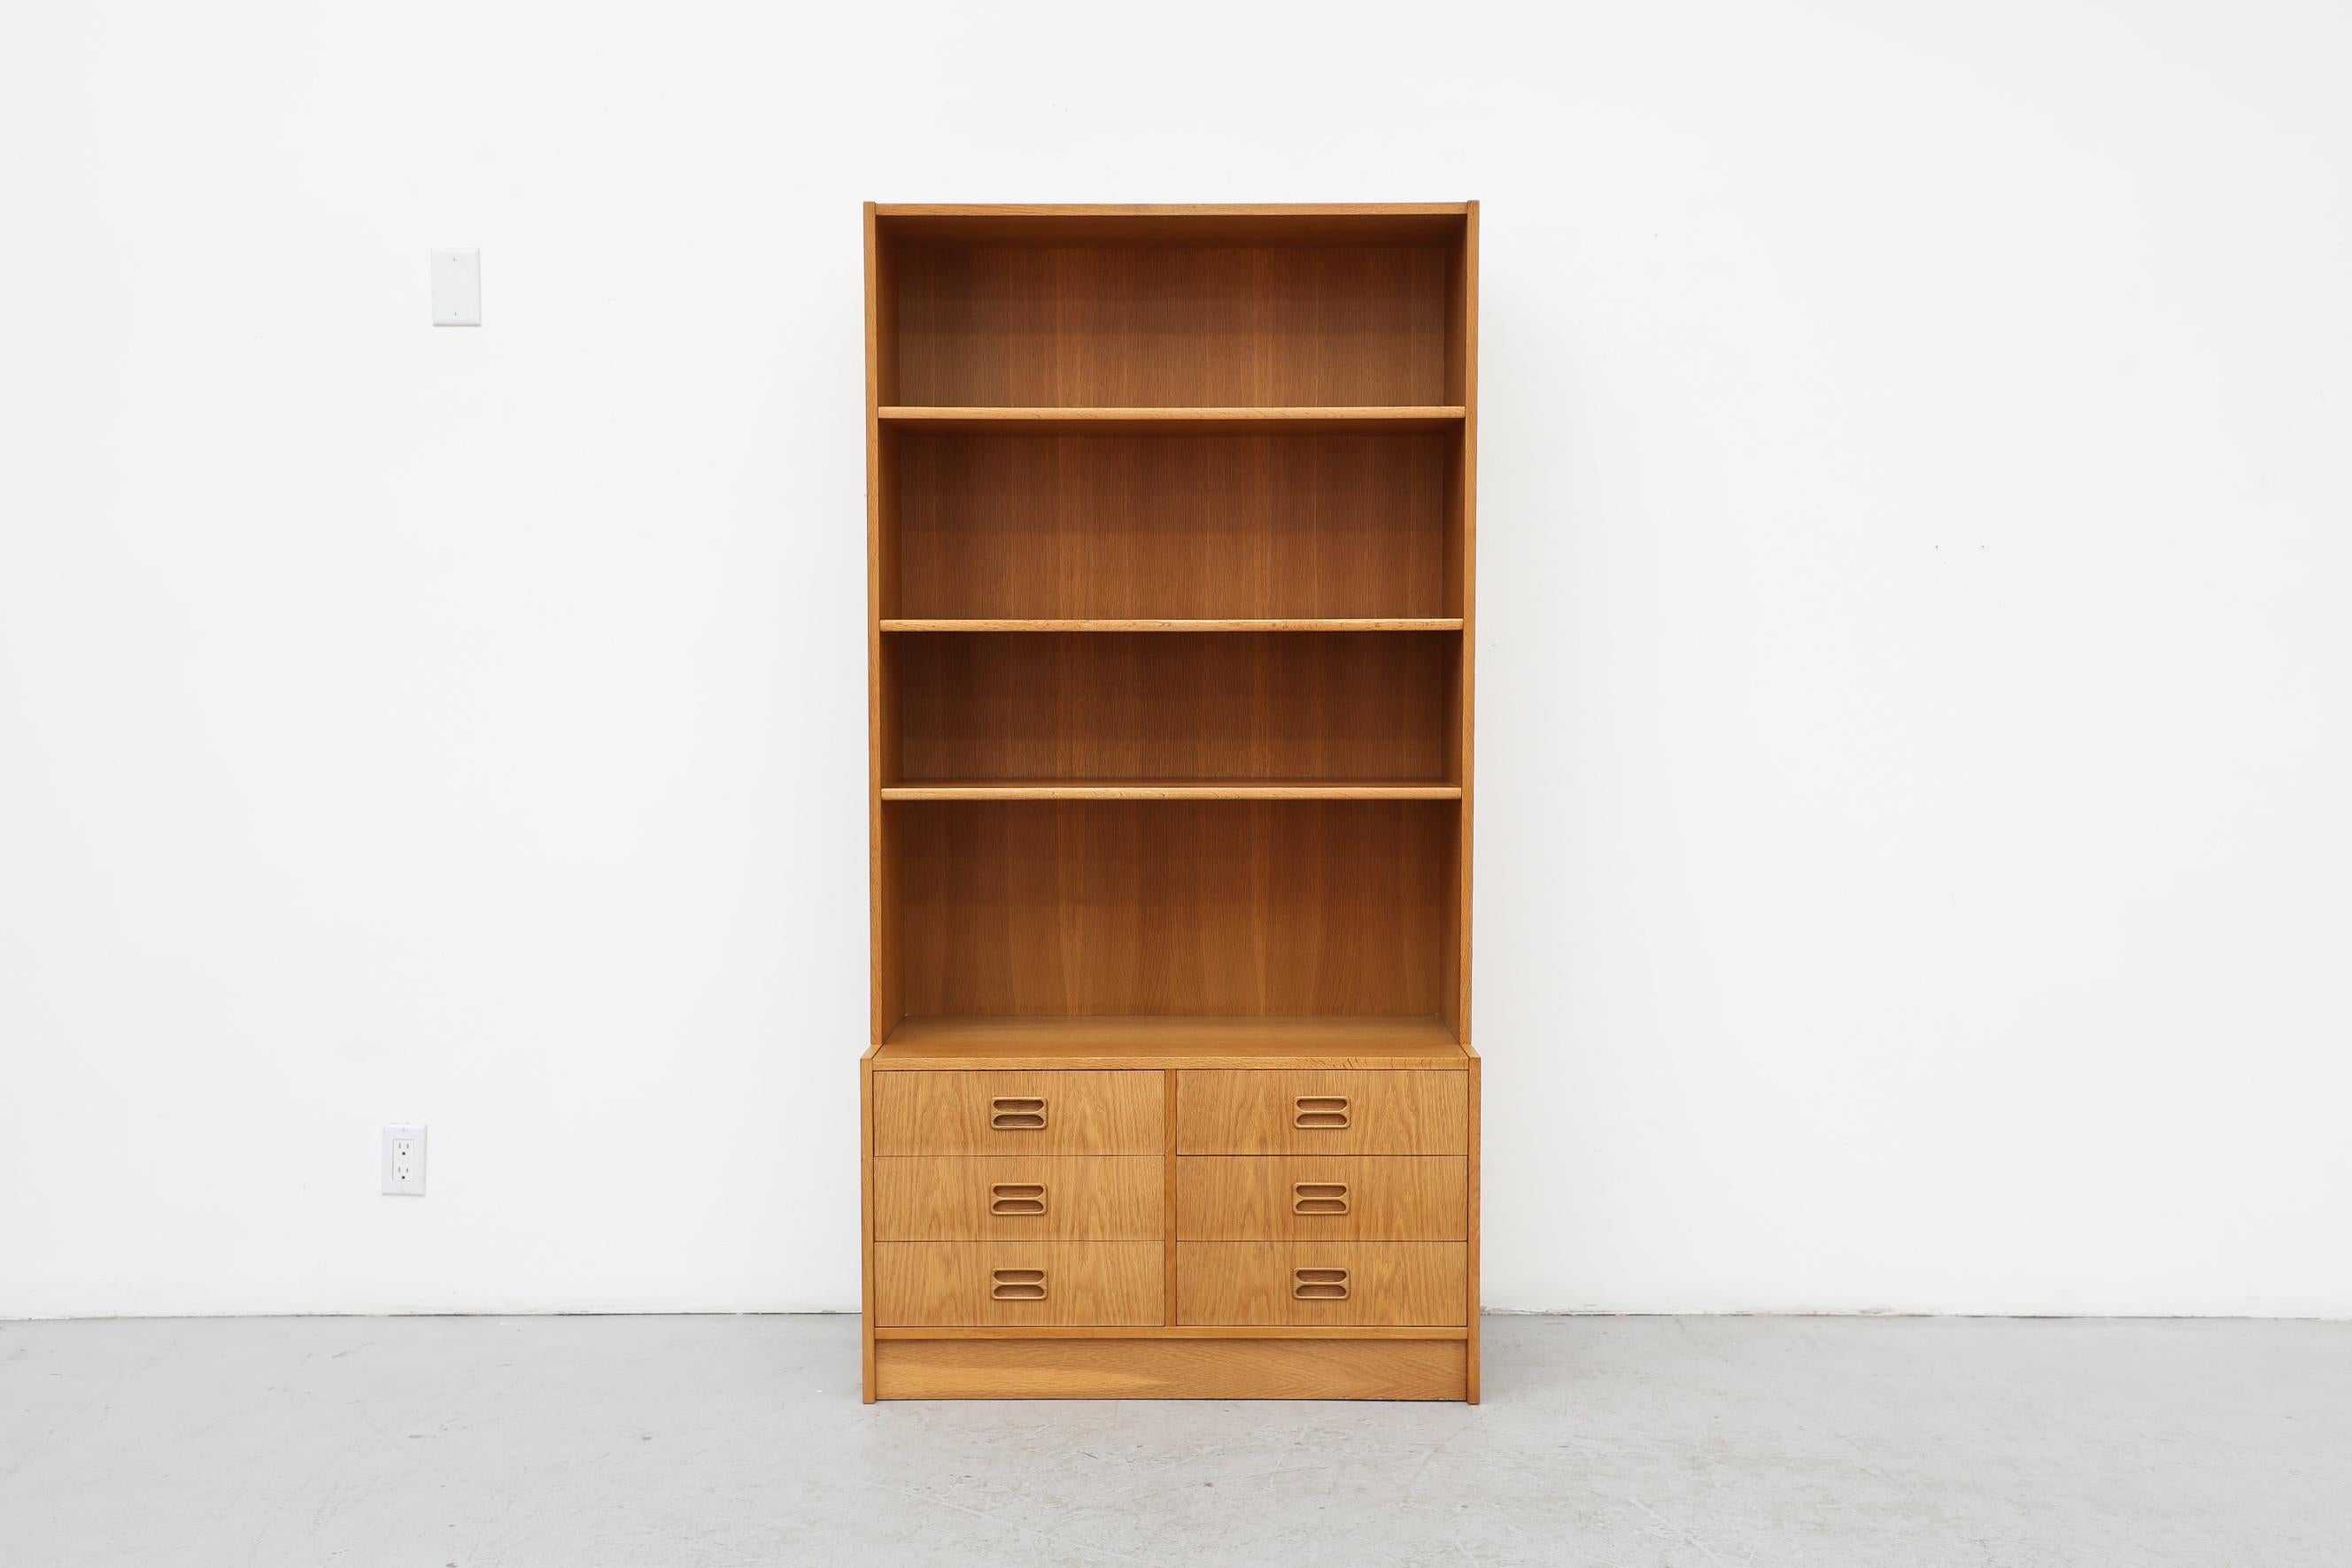 Niels Andersen designed,  oak, standing 2 piece bookcase. Lower cabinet has four drawers, the upper portion has shelves. Two are available, one has a small cutout at the bottom middle of the shelving portion for a cord to go through. Both in